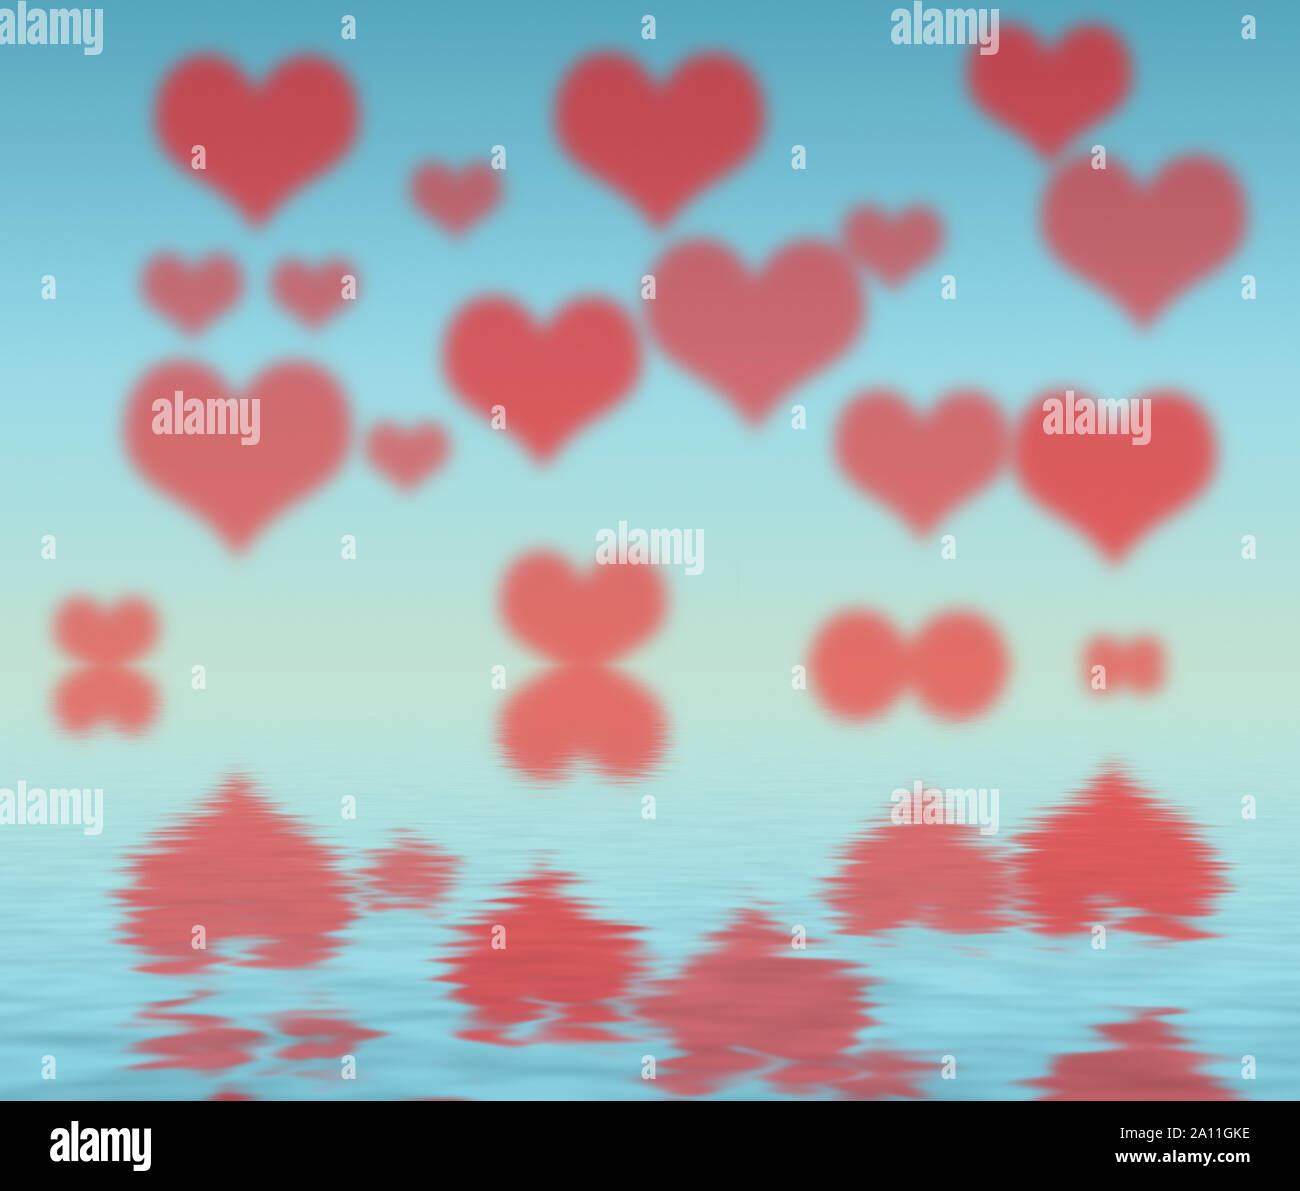 Many blurred hearts shapes in the sky and reflecting in water - simple illustration. Stock Photo